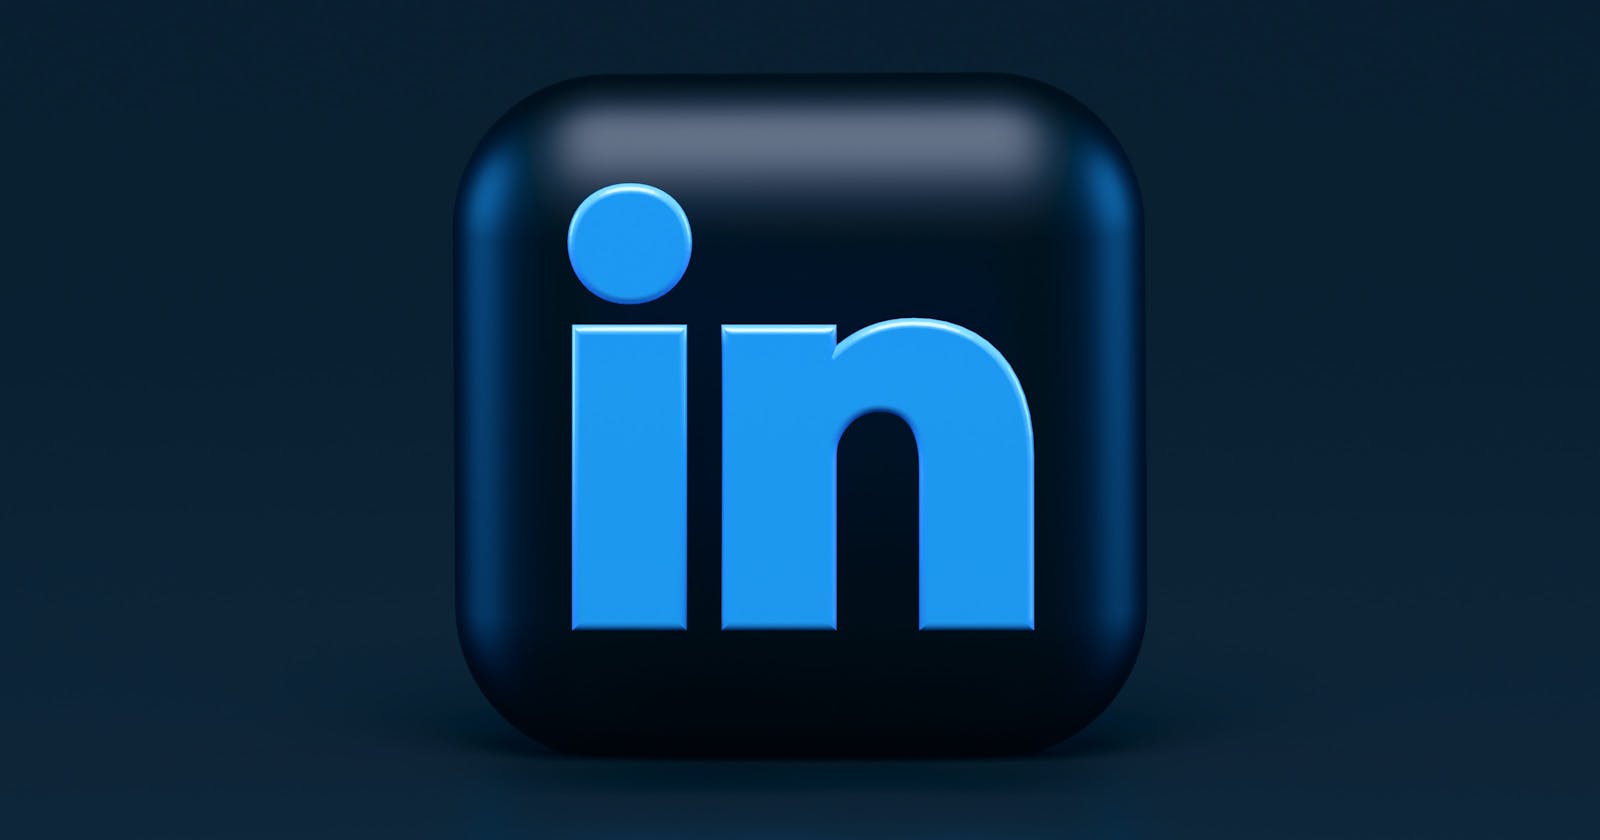 LinkedIn - How to get started?